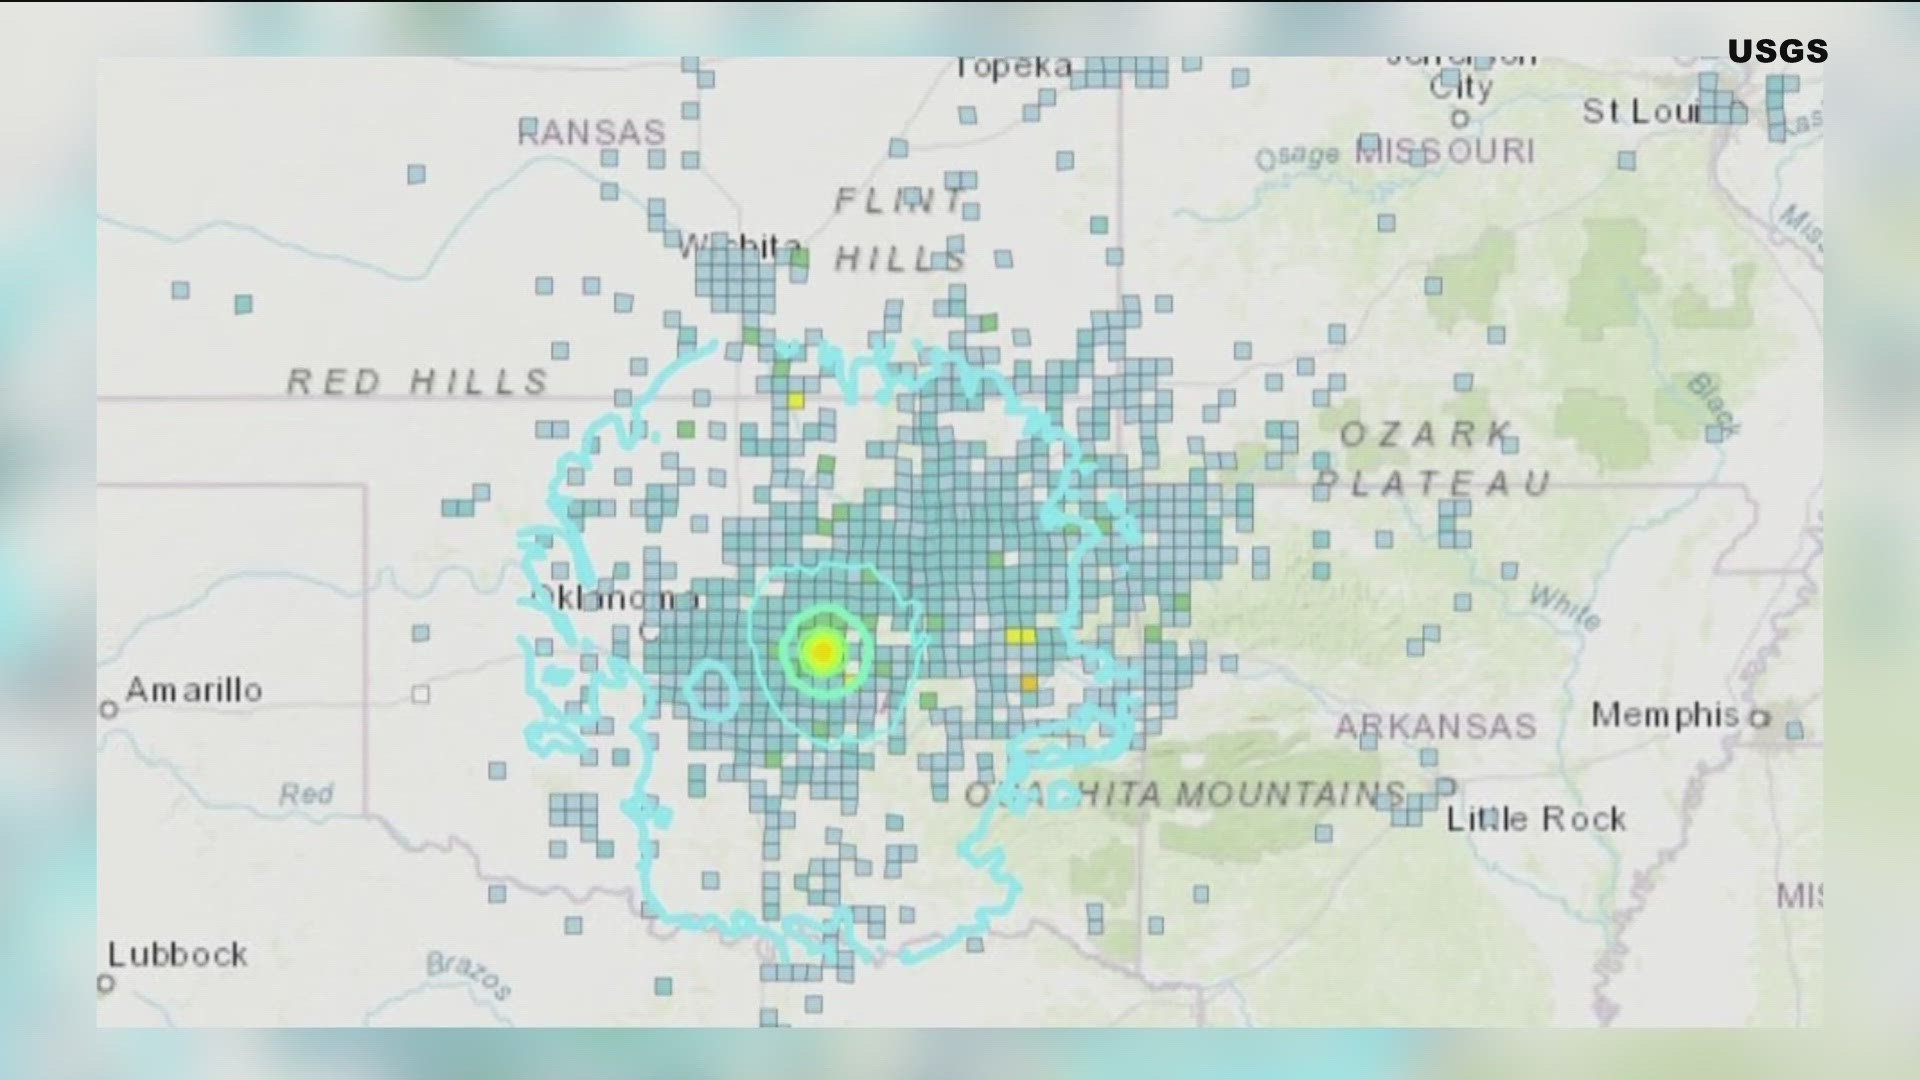 RESIDENTS IN NORTHWEST ARKANSAS MAY HAVE FELT THE EFFECTS OF AN EARTHQUAKE IN OKLAHOMA LATE LAST NIGHT.